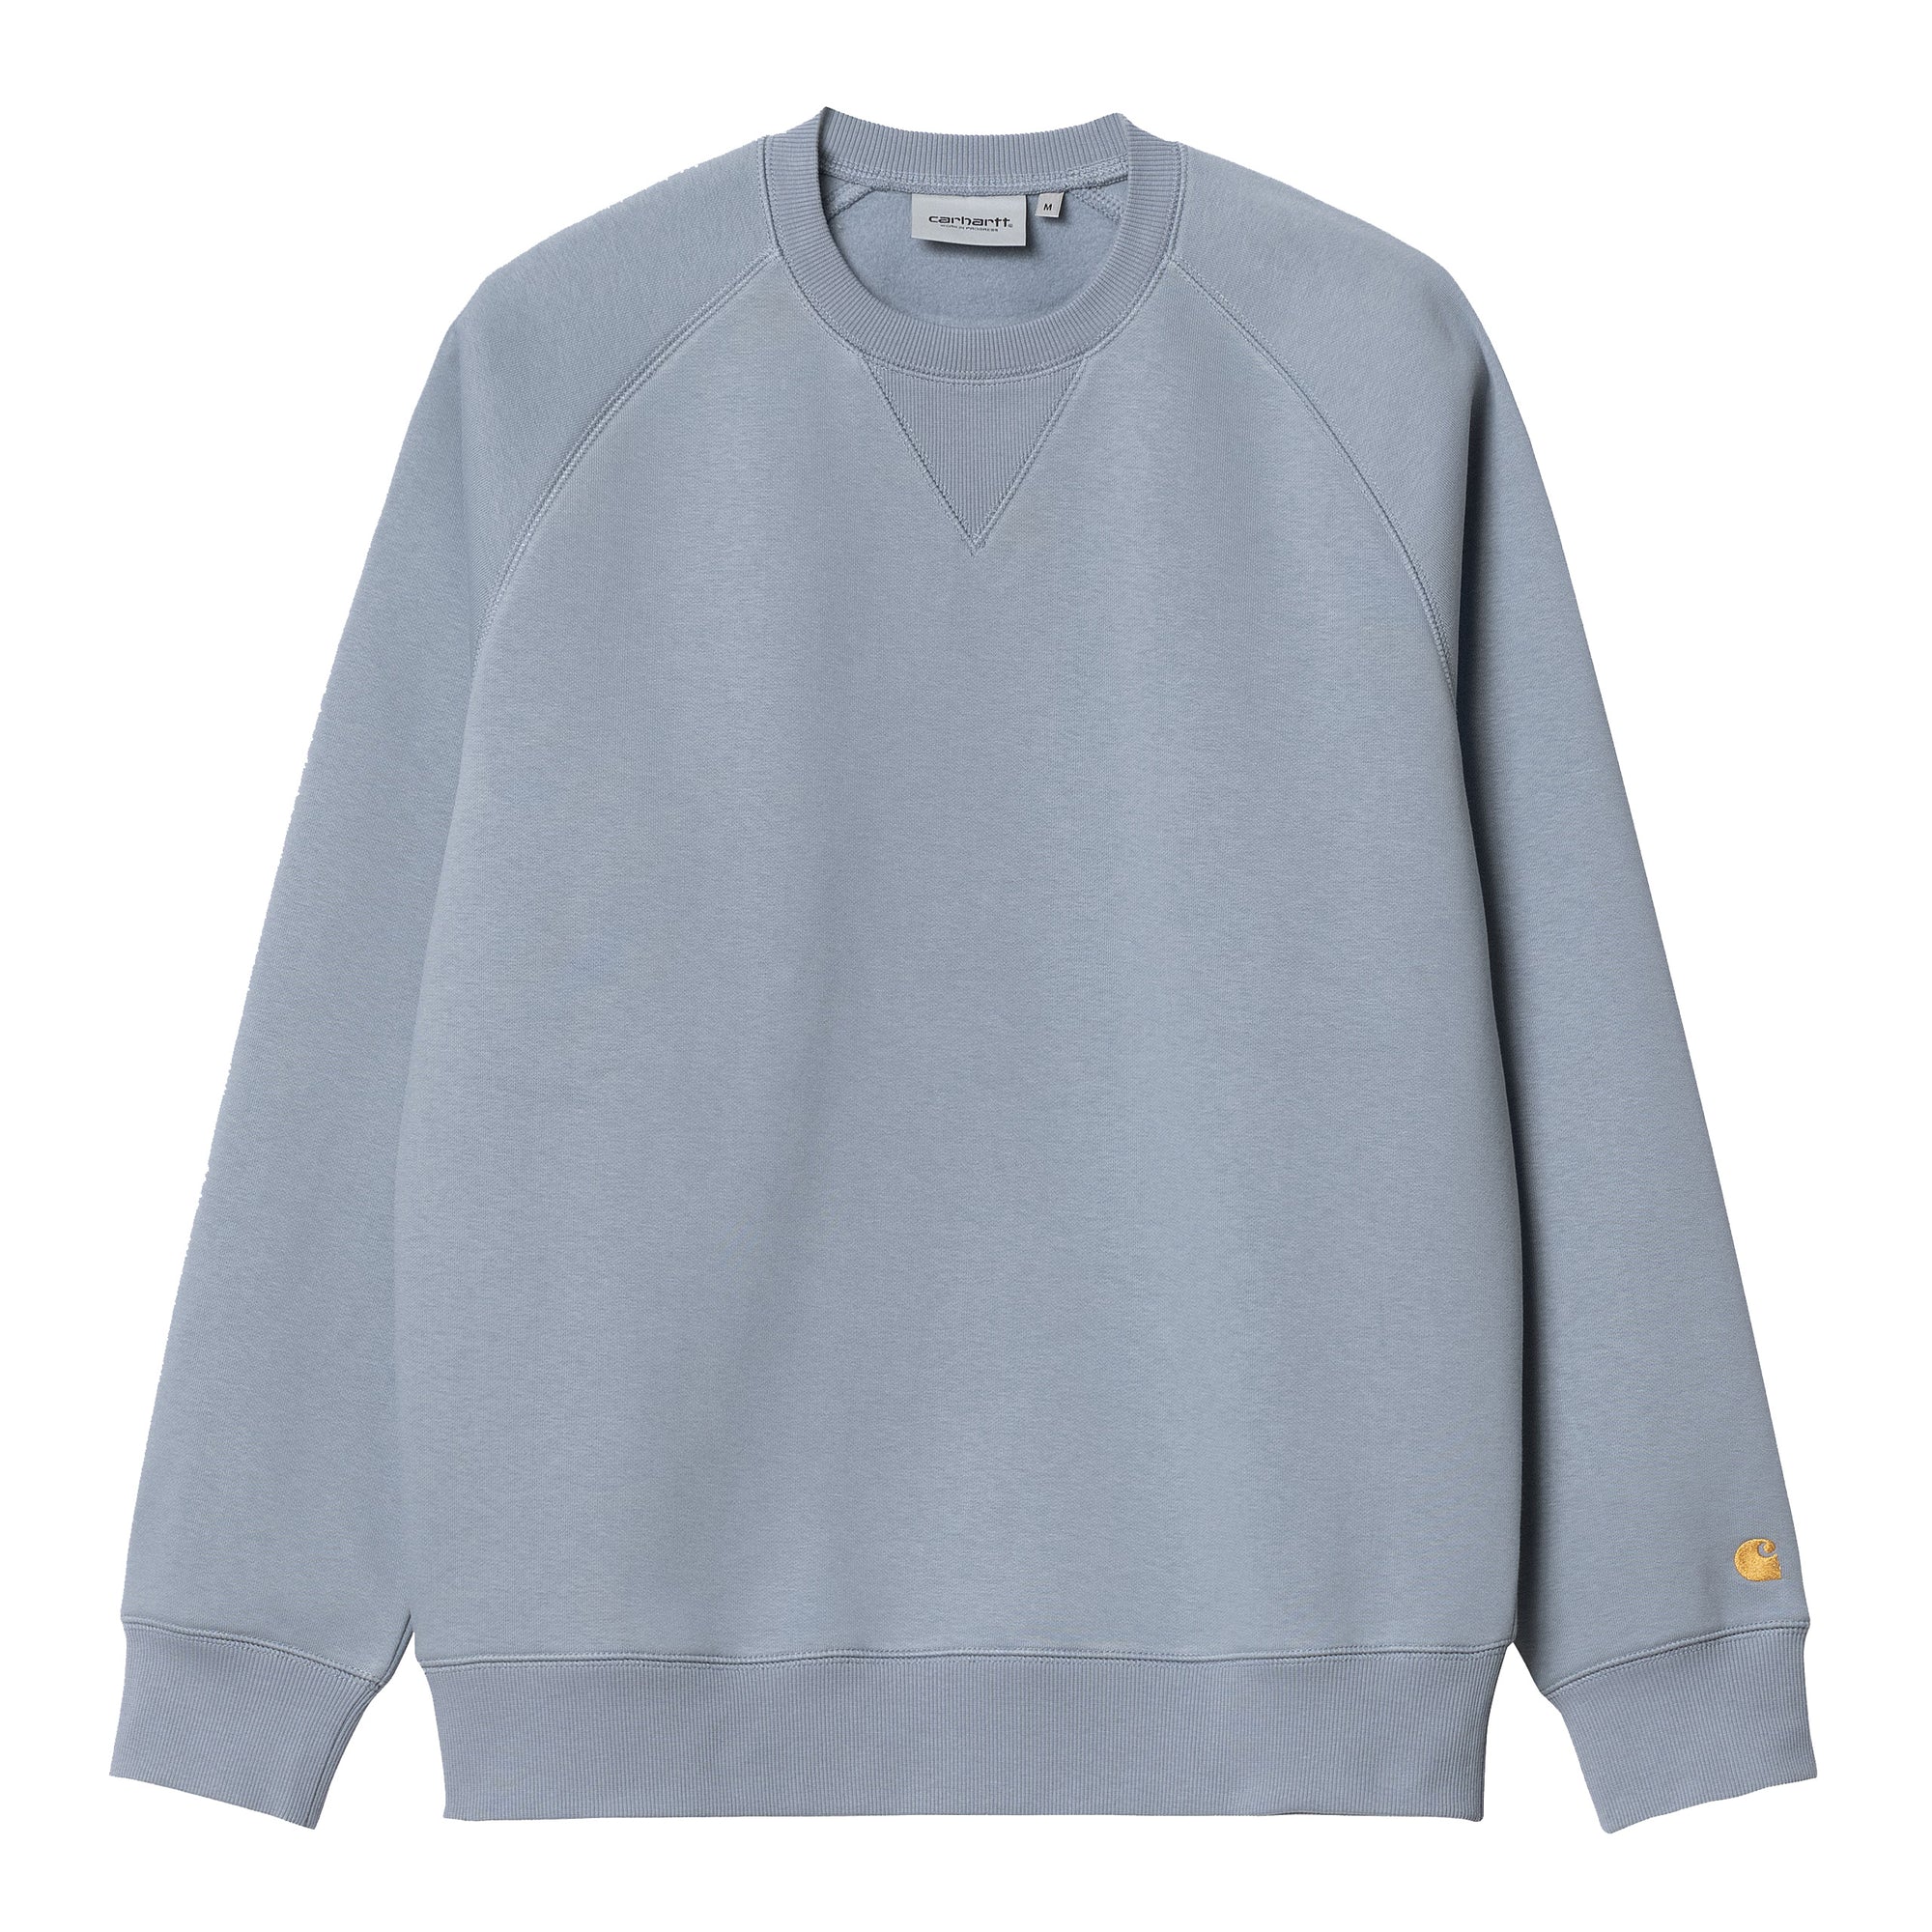 Carhartt WIP Chase Sweatshirt in mirror/gold is made of a cotton-polyester blend to keep you warm and comfortable. Pay with Klarna or PayPal.